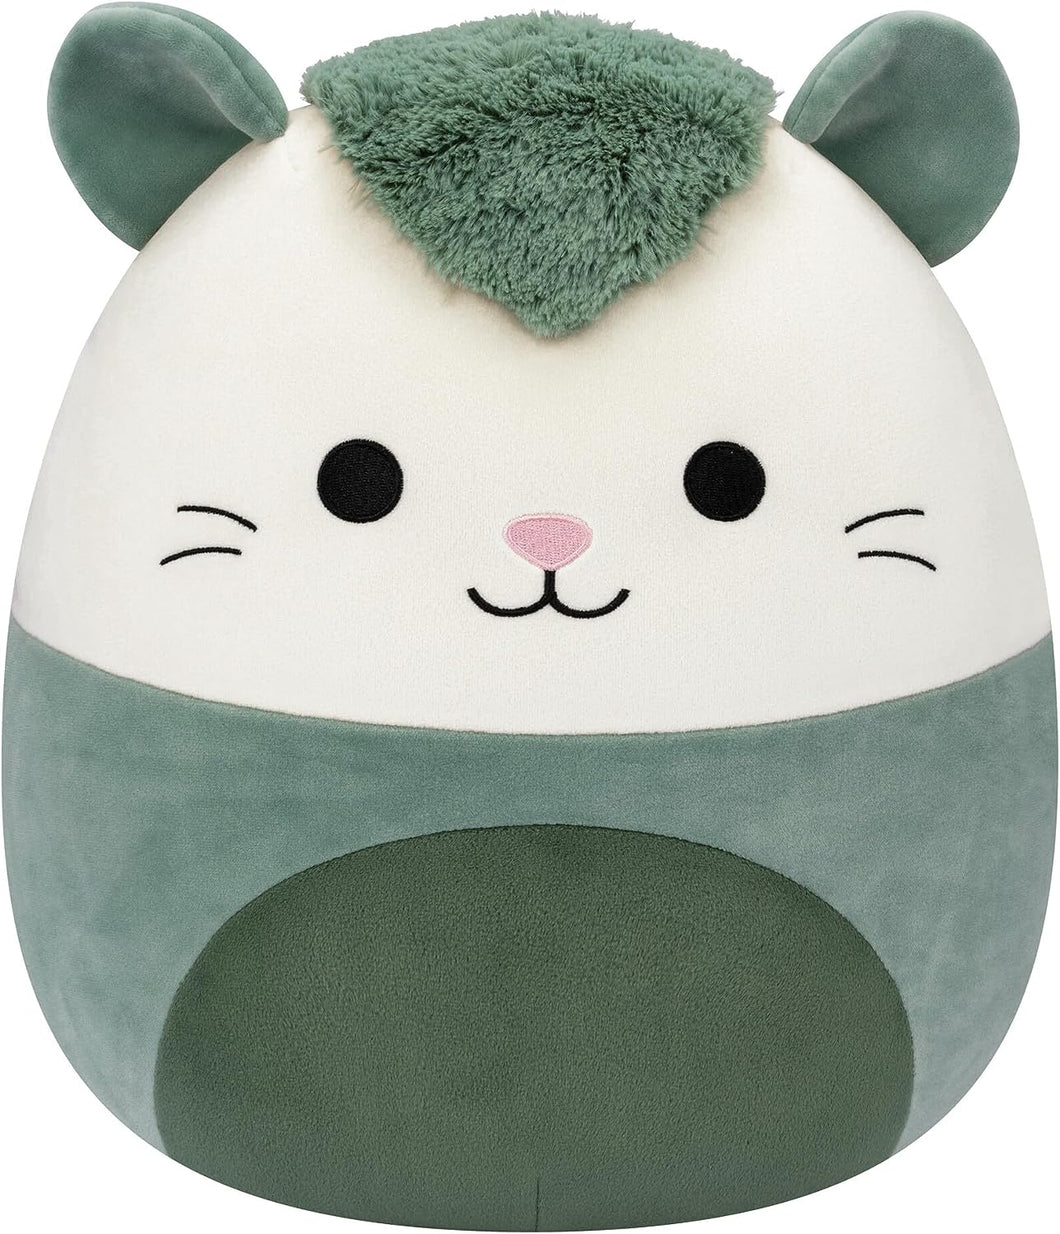 Squishmallows Willoughby the Sage Green Possum 12